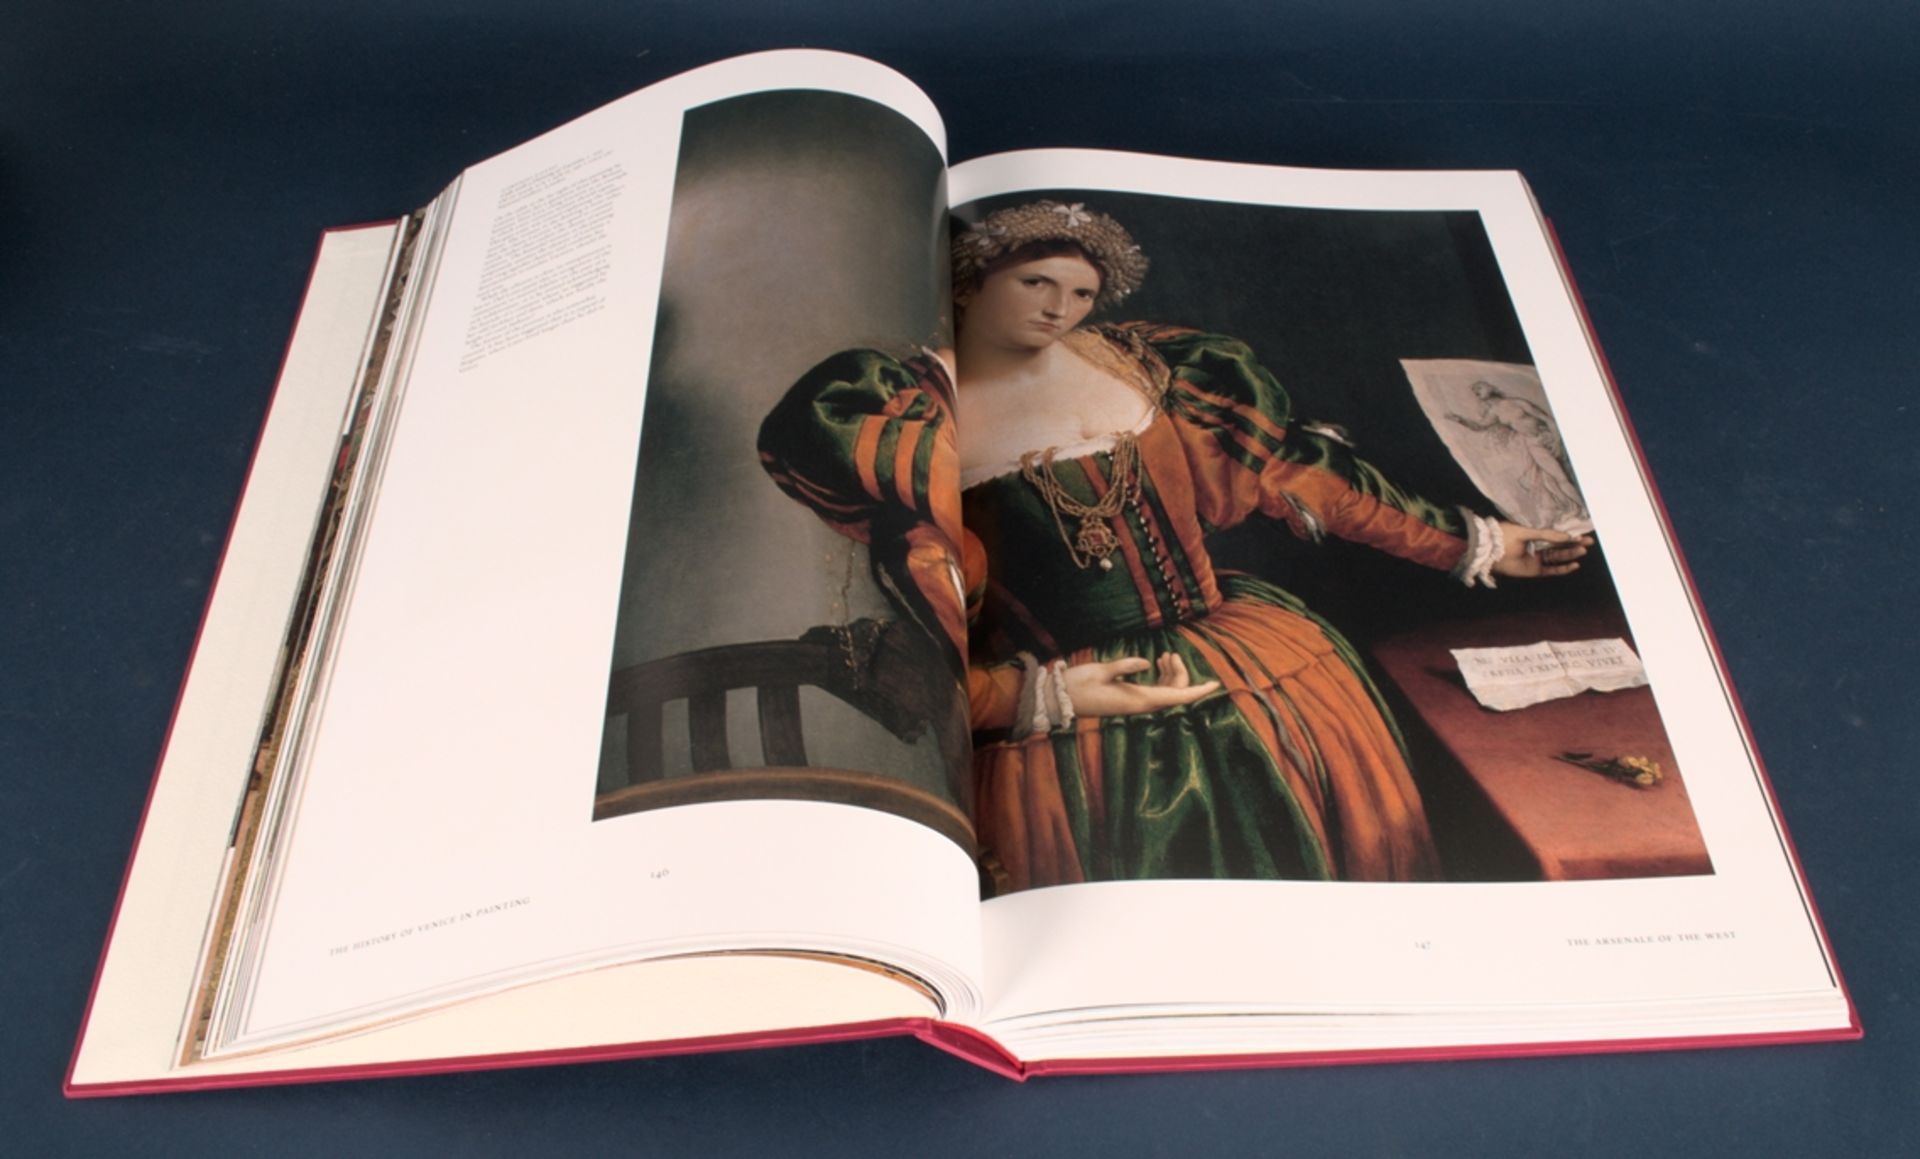 "The History of Venice in Painting", edited by Georges Duby & Guy Lobrichon, Abbeville Publishers - Bild 5 aus 8